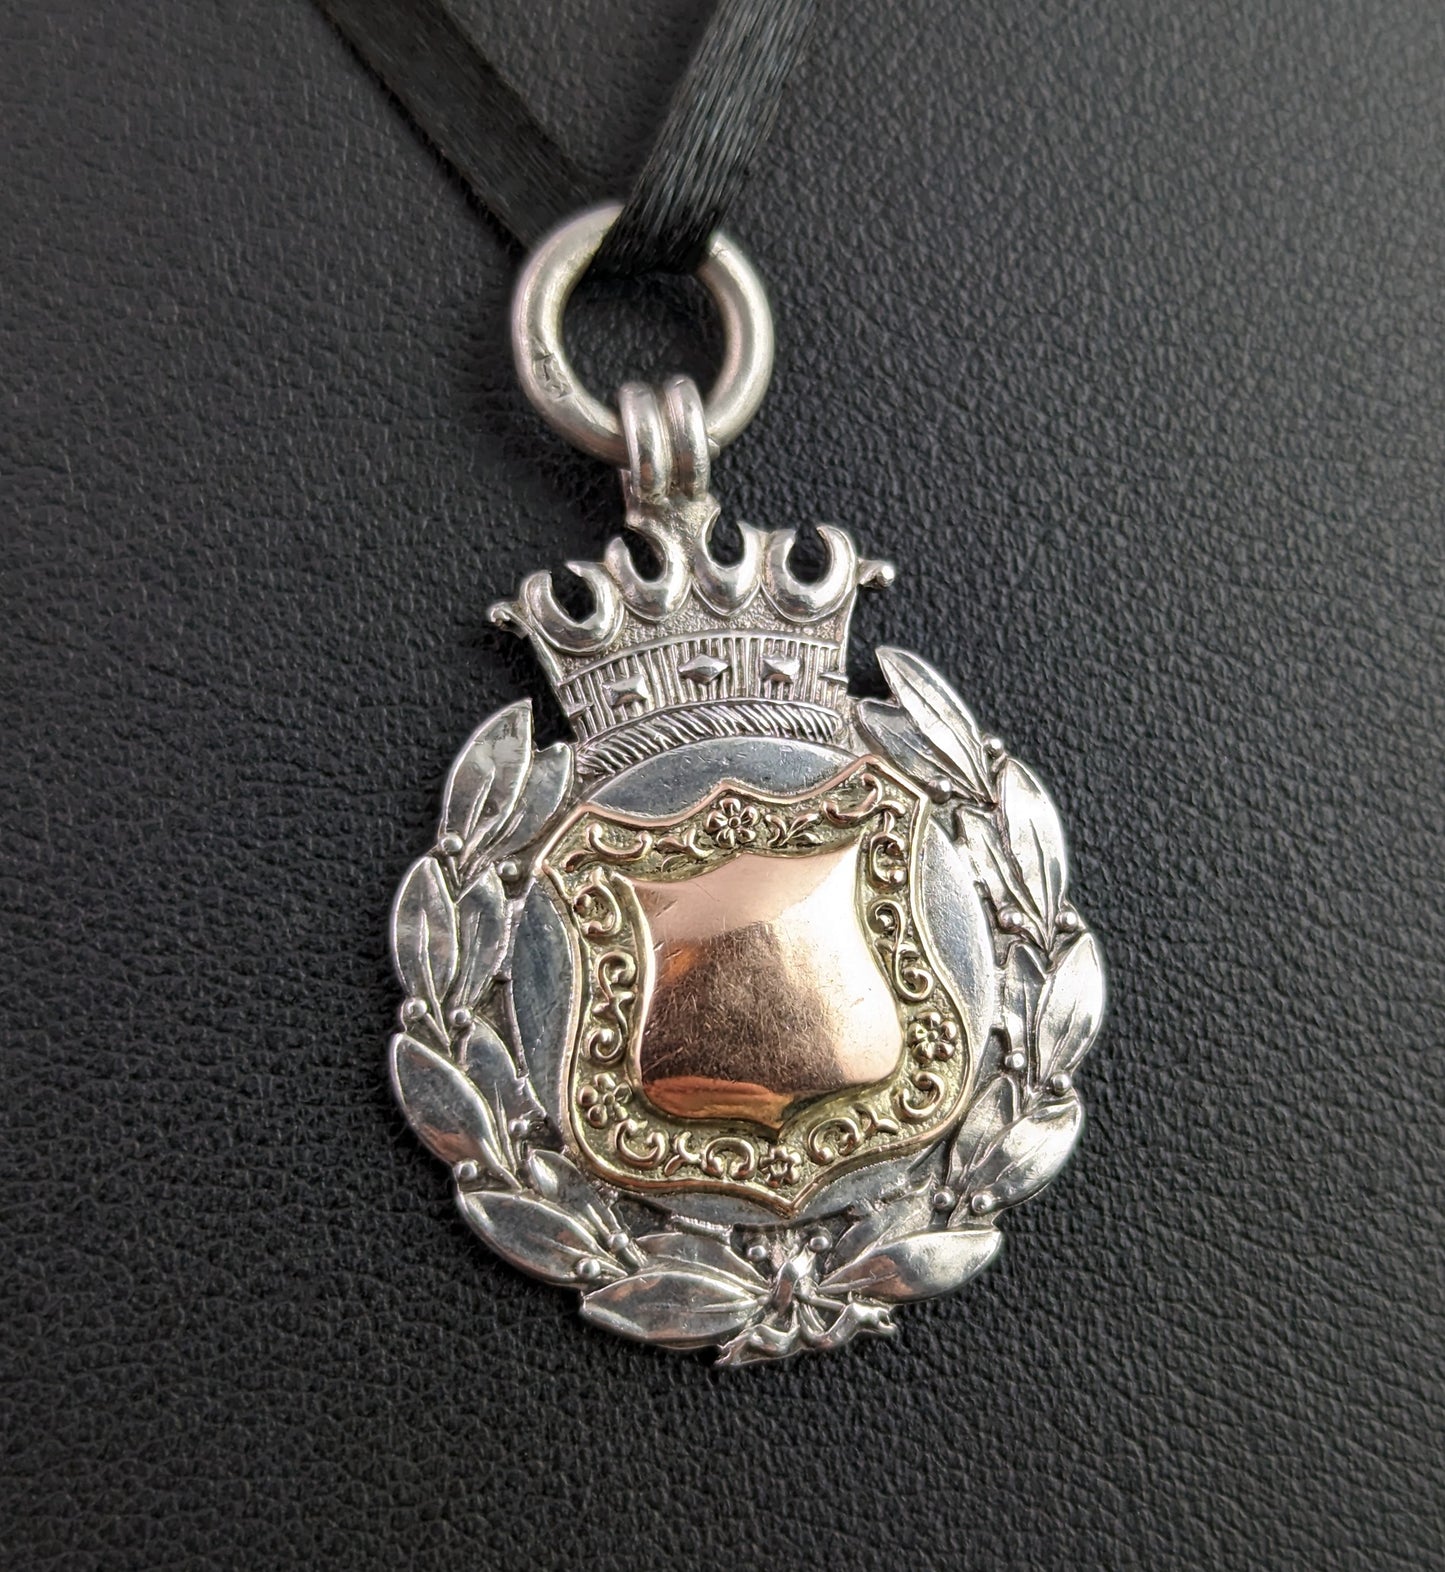 Vintage Silver and Rose gold fob pendant, Art Deco, Wreath and Crown